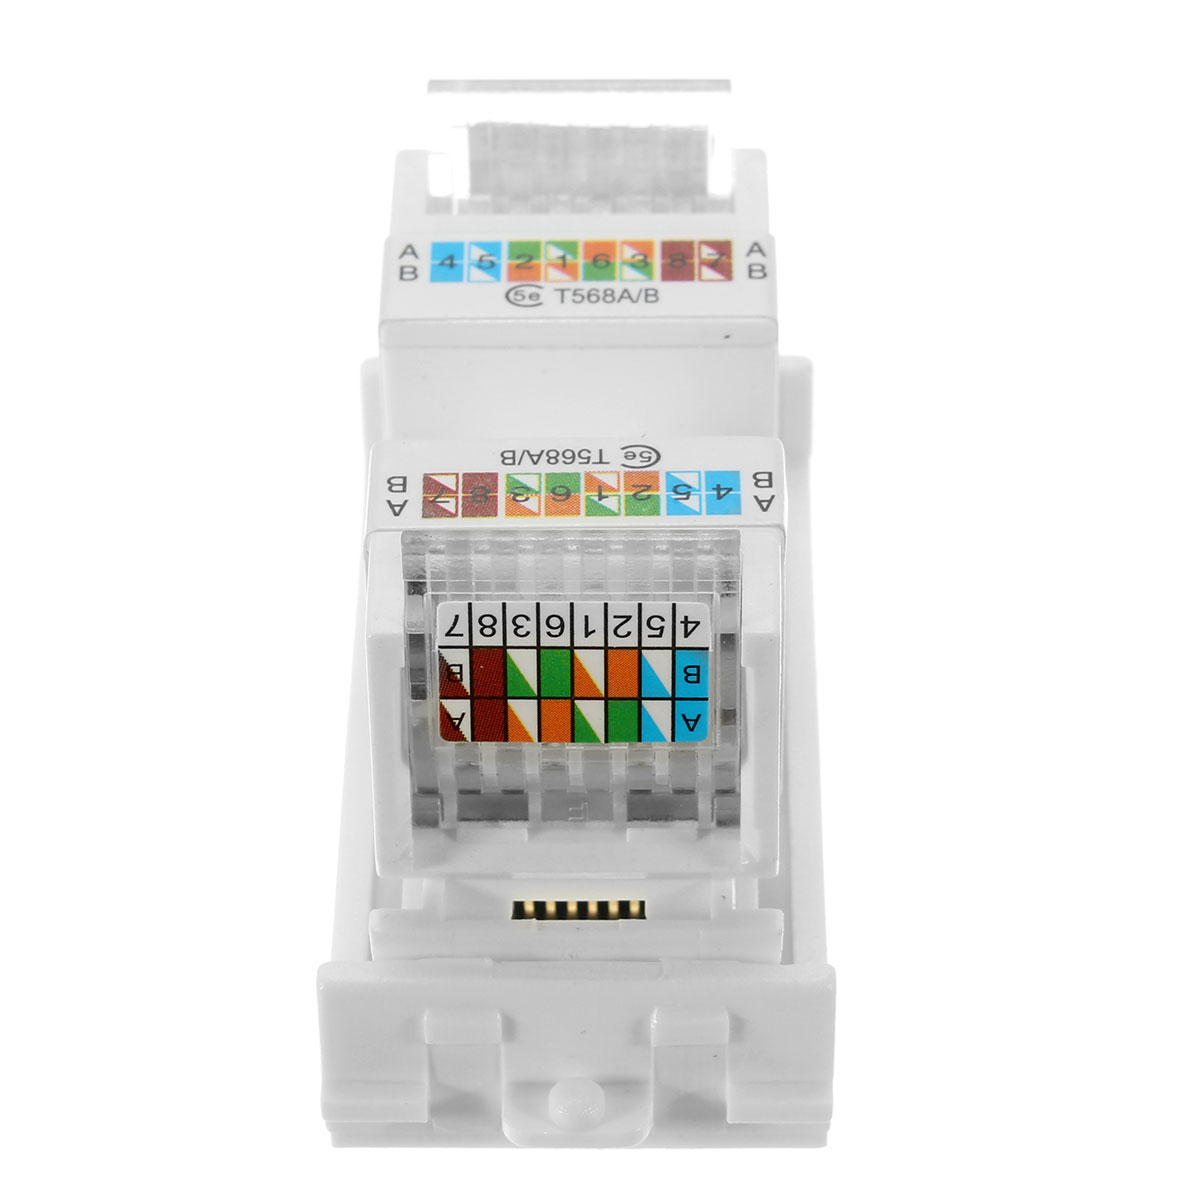 RJ45-Wall-Plate-Dual-Port-Socket-Panel-Building-Materials-Network-Combination-Connector-Module-1401148-7